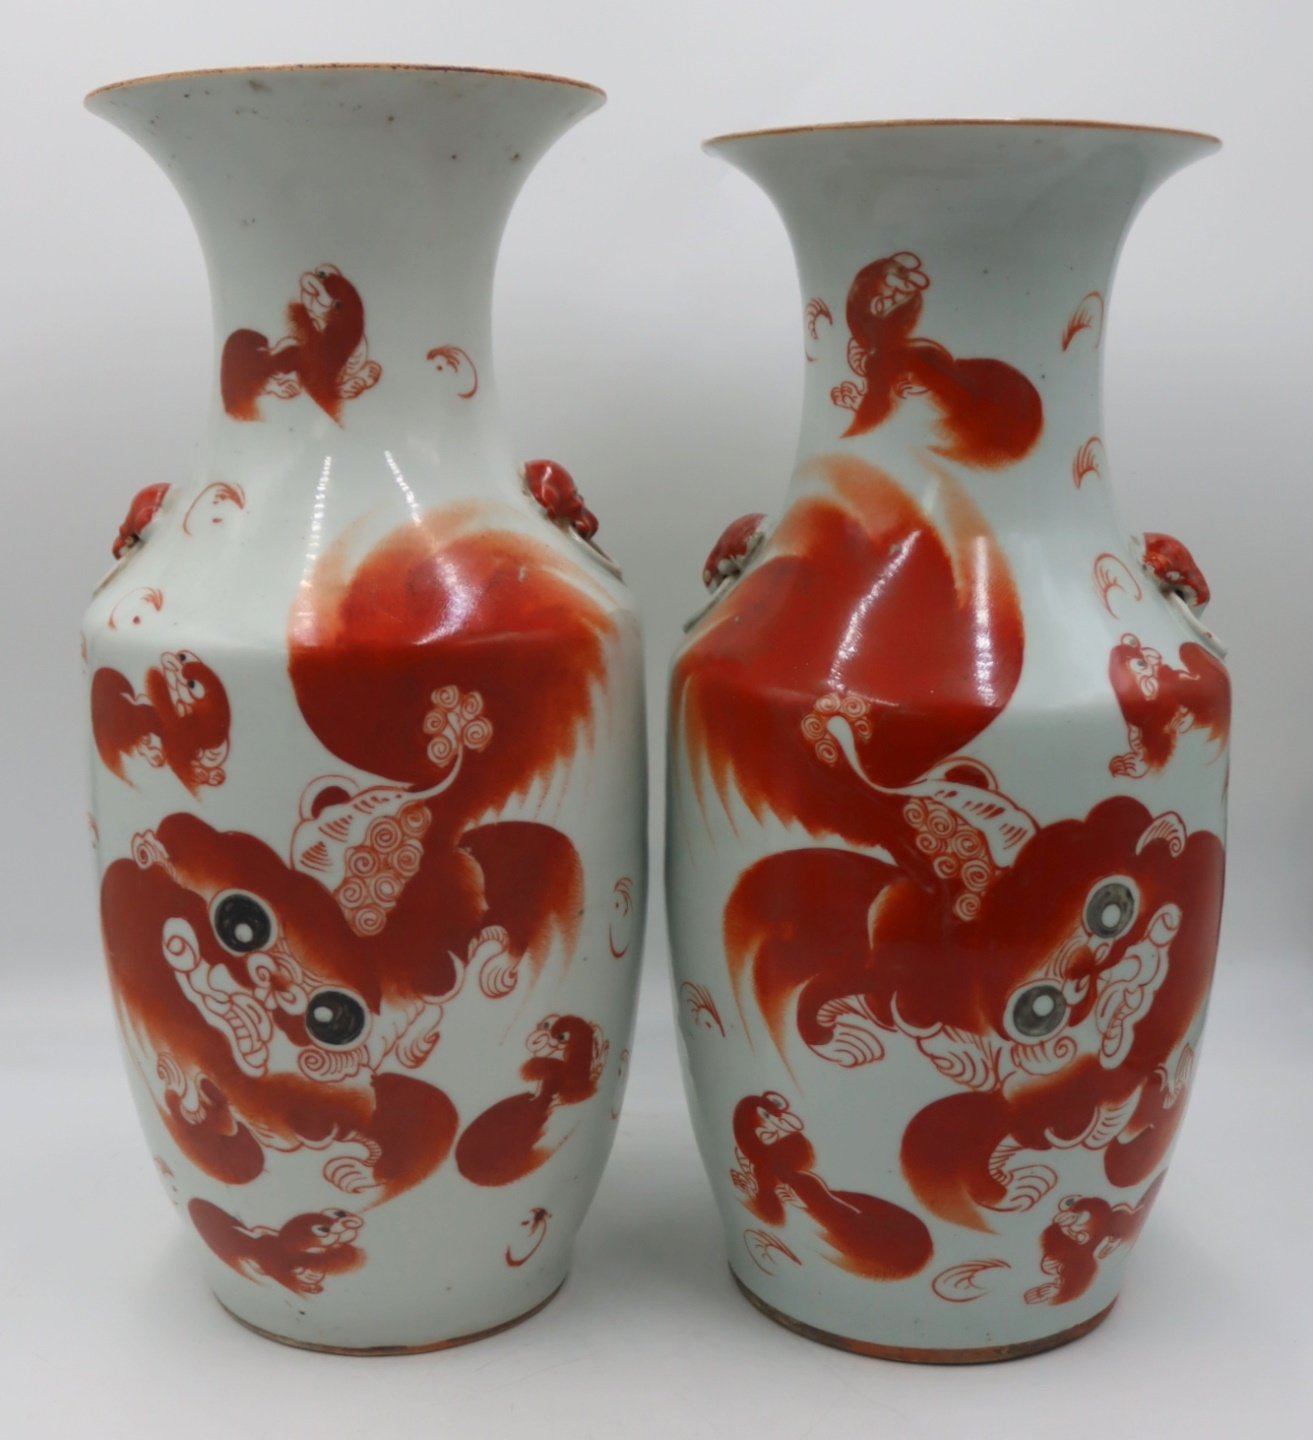 NEAR PAIR OF CHINESE IRON RED FOO 30b87a